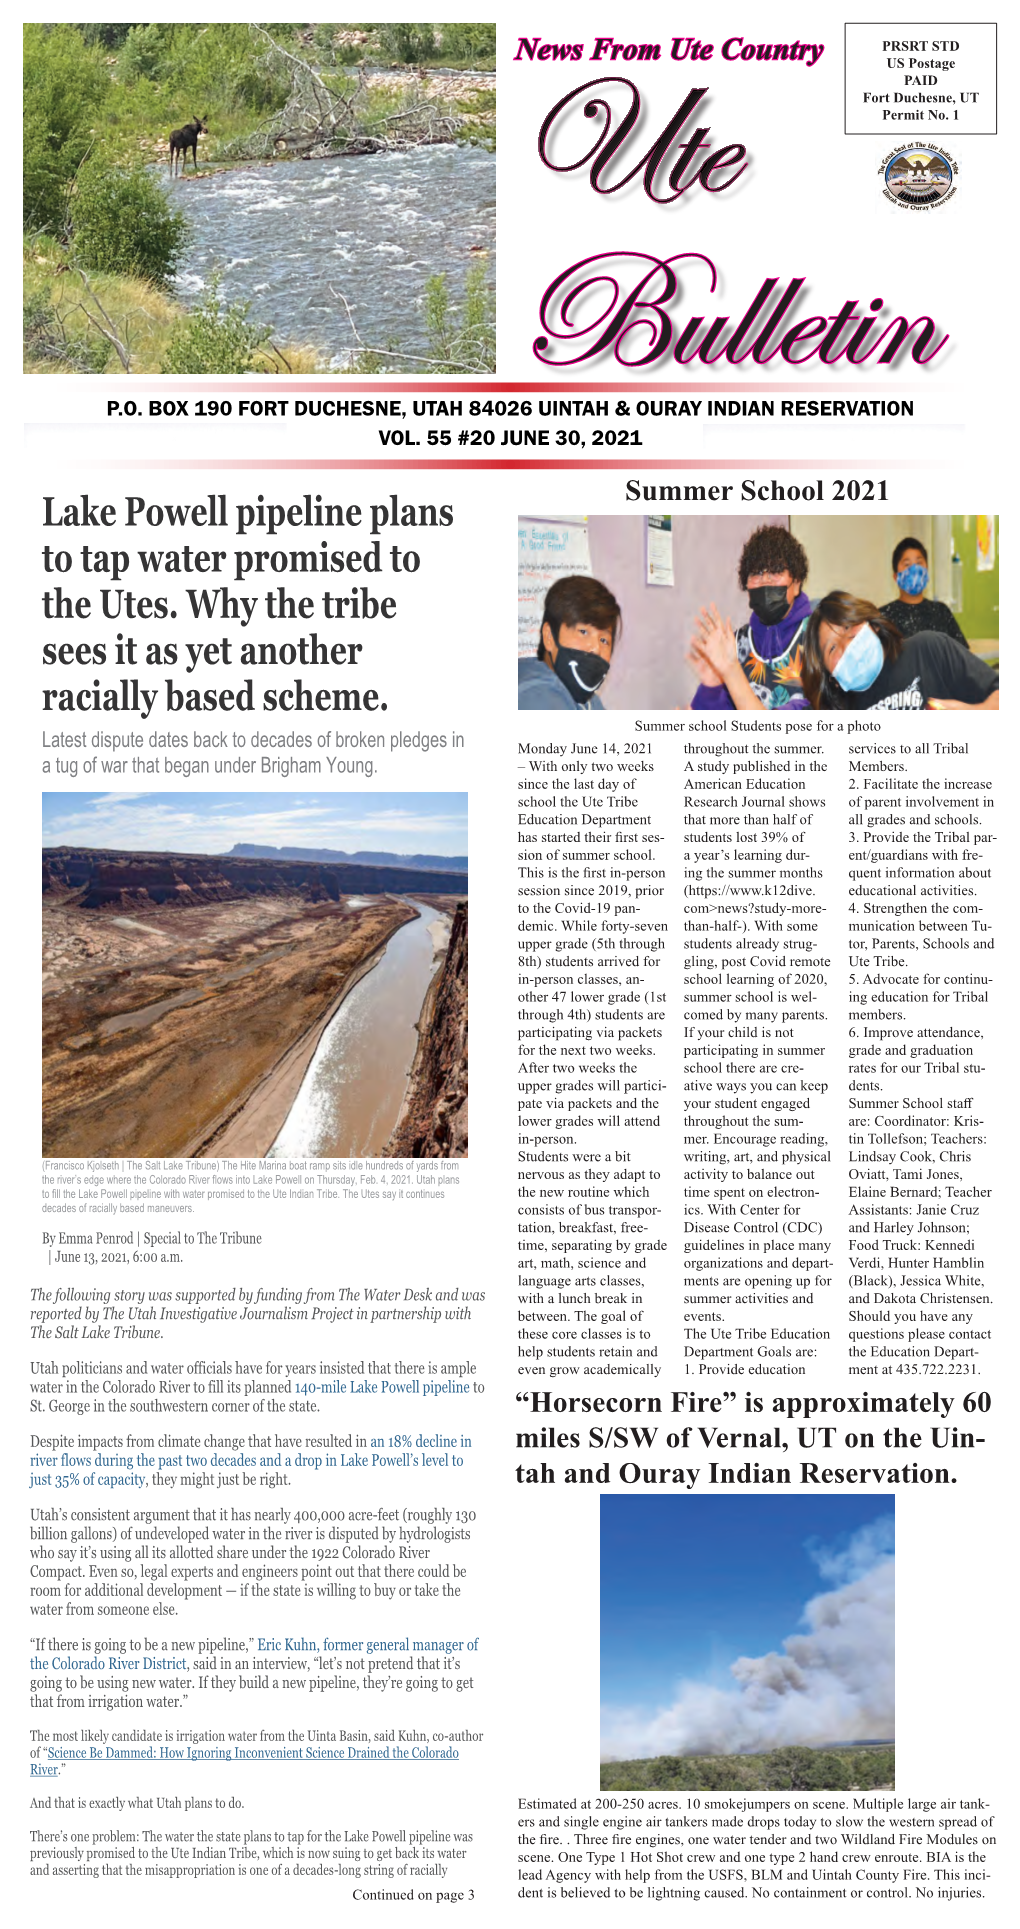 Lake Powell Pipeline Plans to Tap Water Promised to the Utes. Why the Tribe Sees It As Yet Another Racially Based Scheme